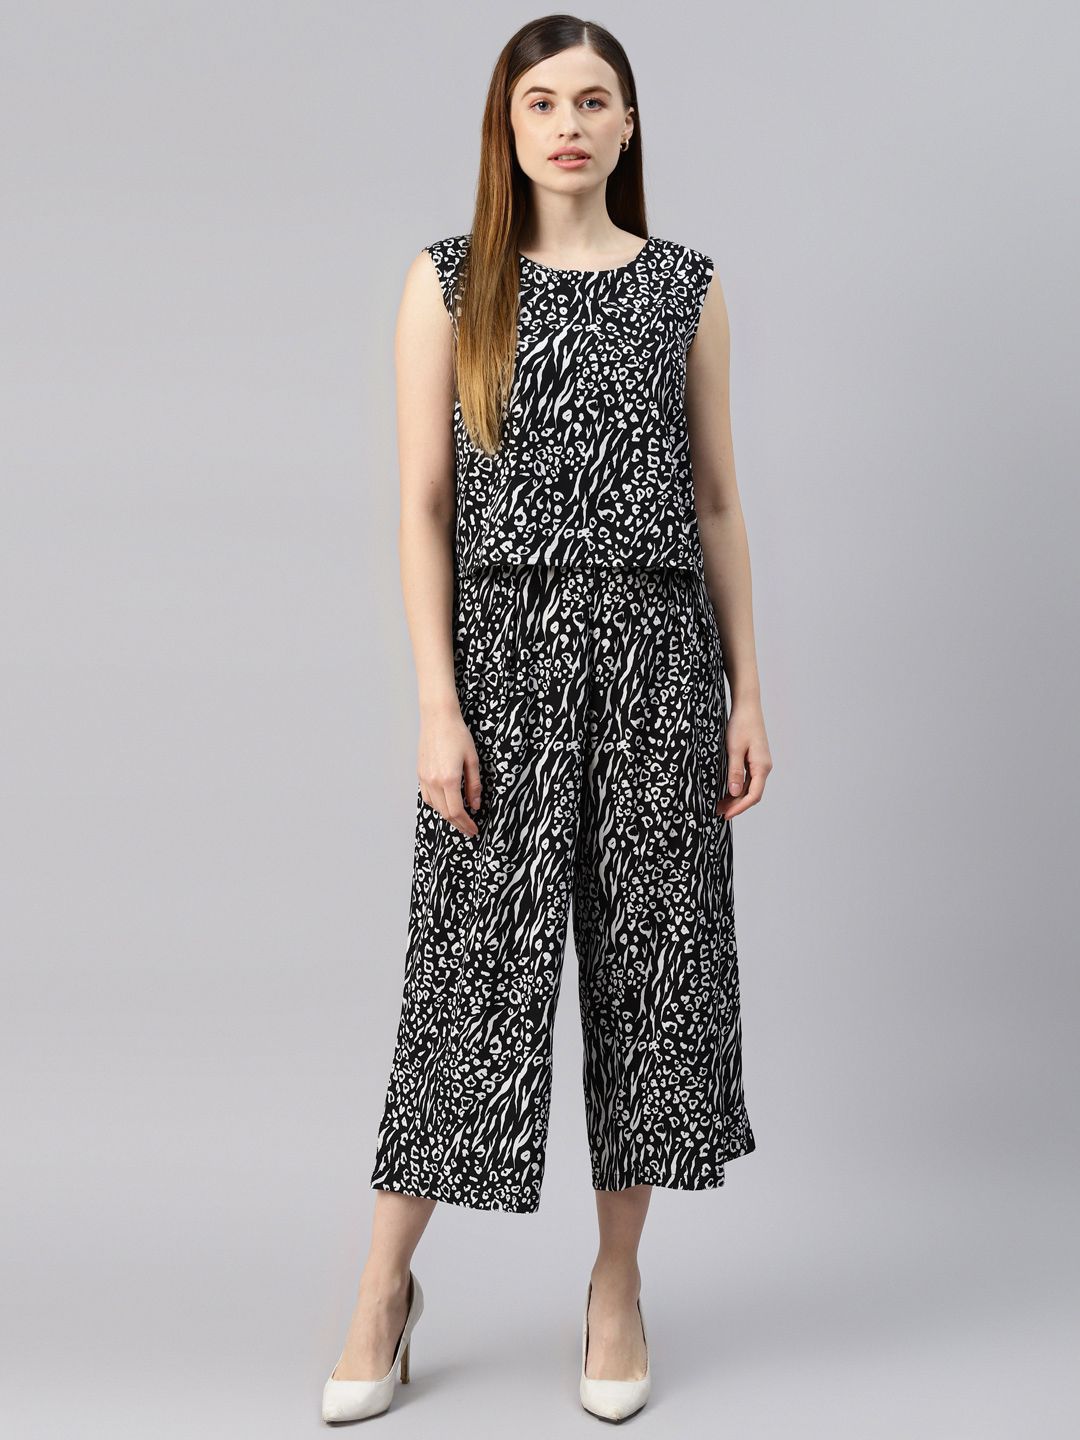 Cottinfab Black & White Printed Culotte Jumpsuit Price in India